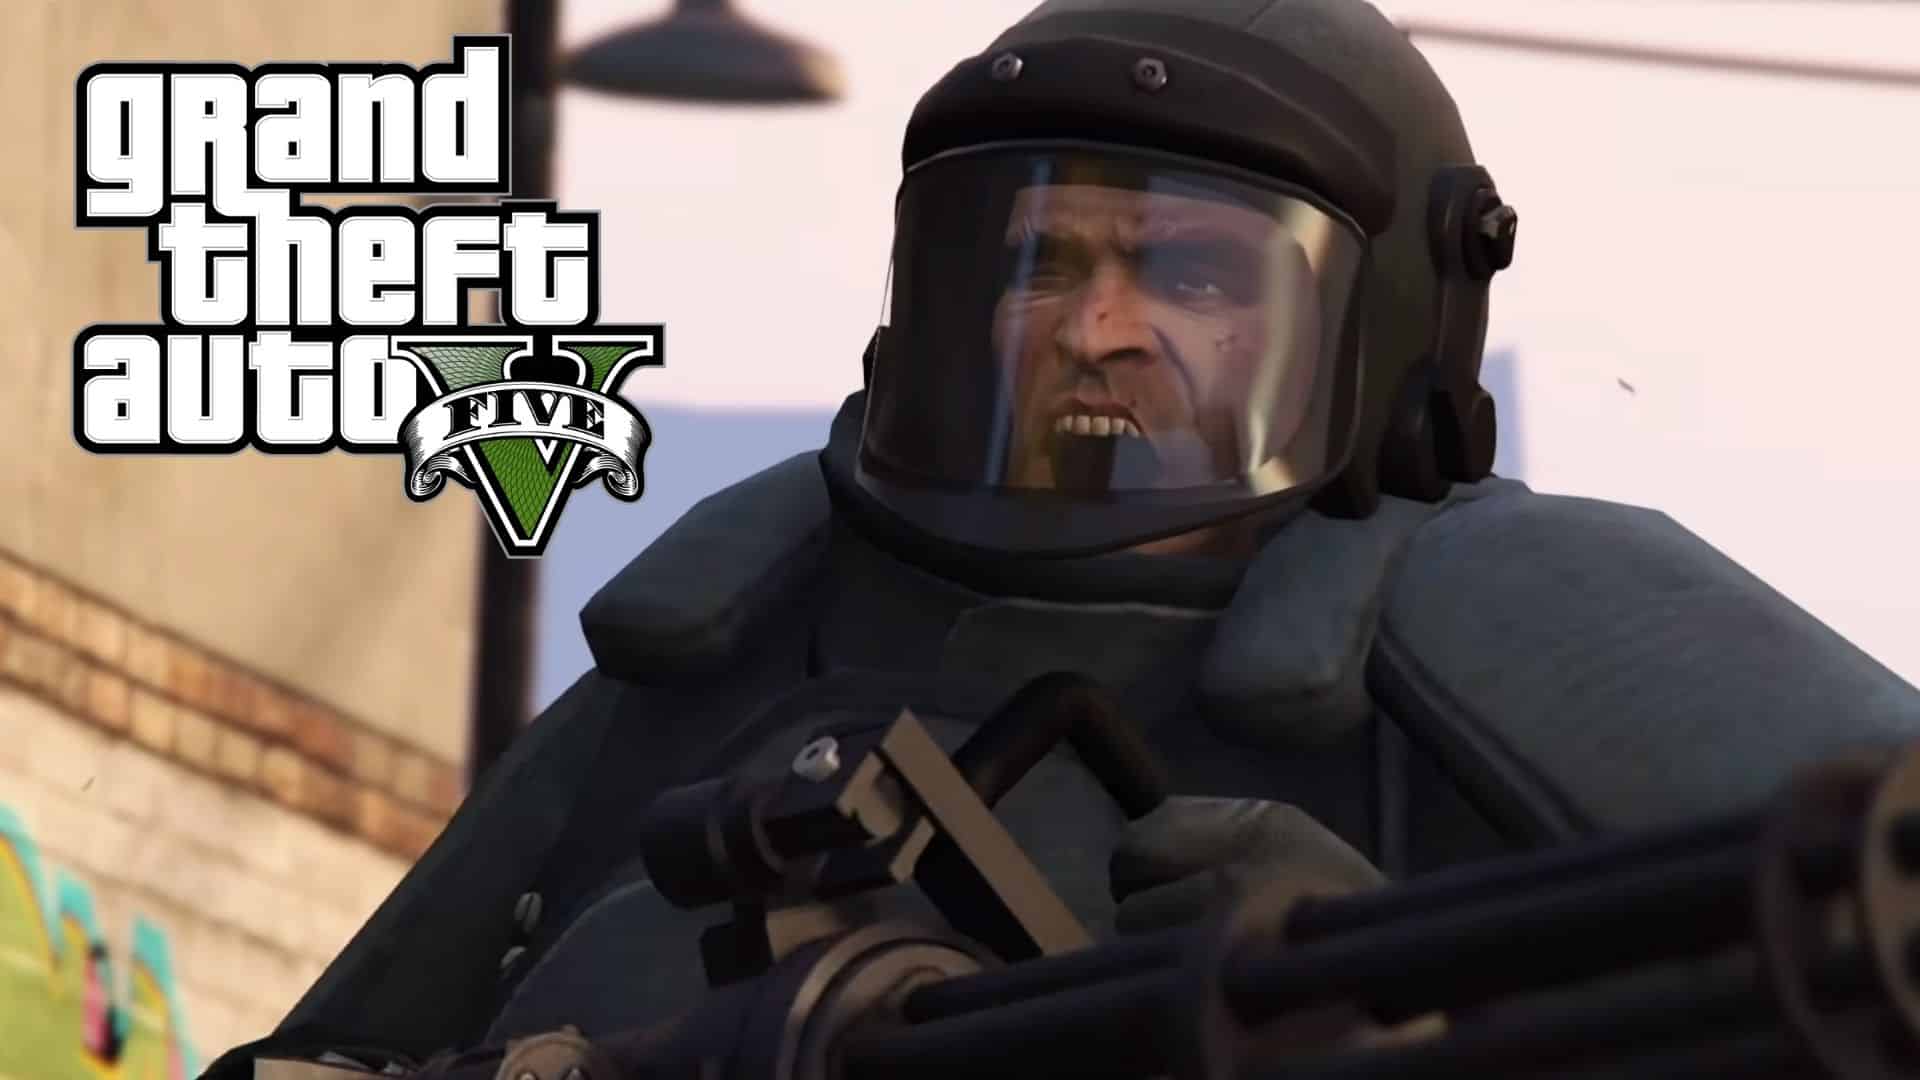 GTA 5 cheats: PS4, Xbox, PC mods, codes and phone numbers